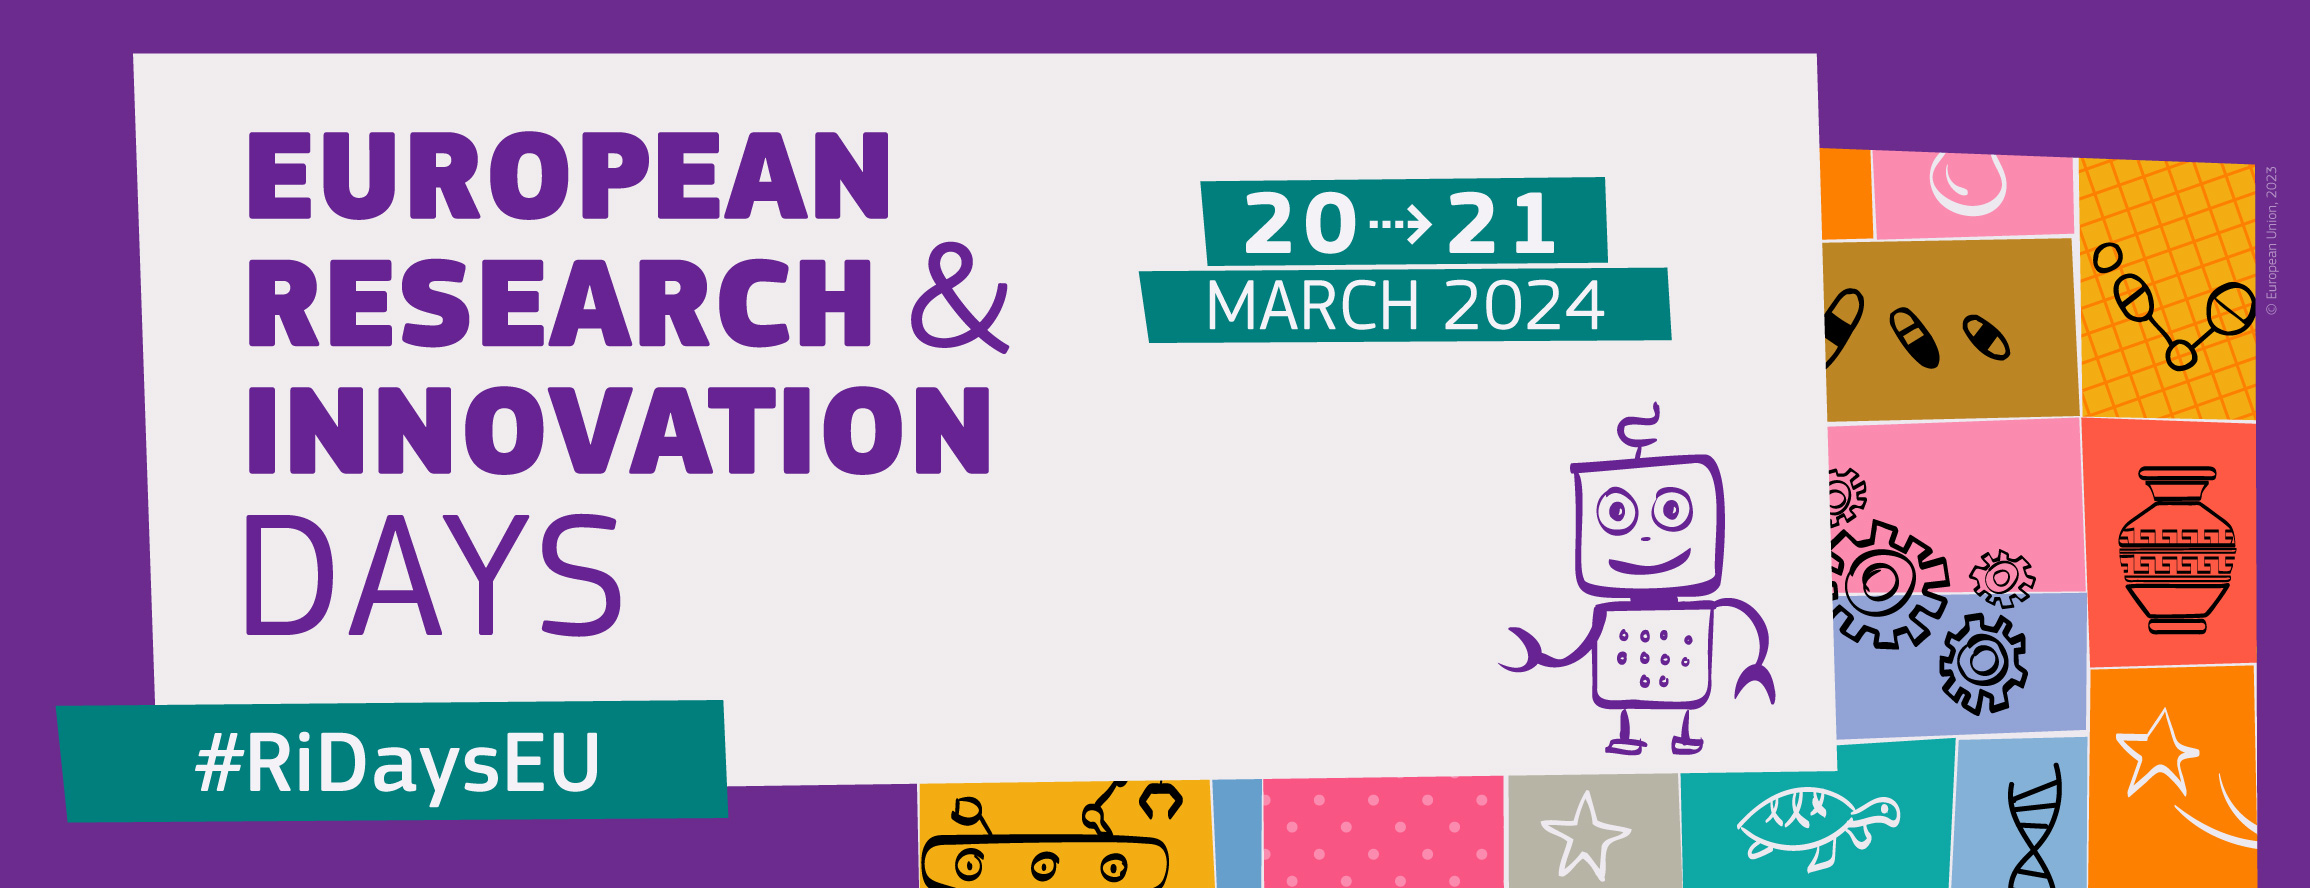 European Research & Innovation Days Banner